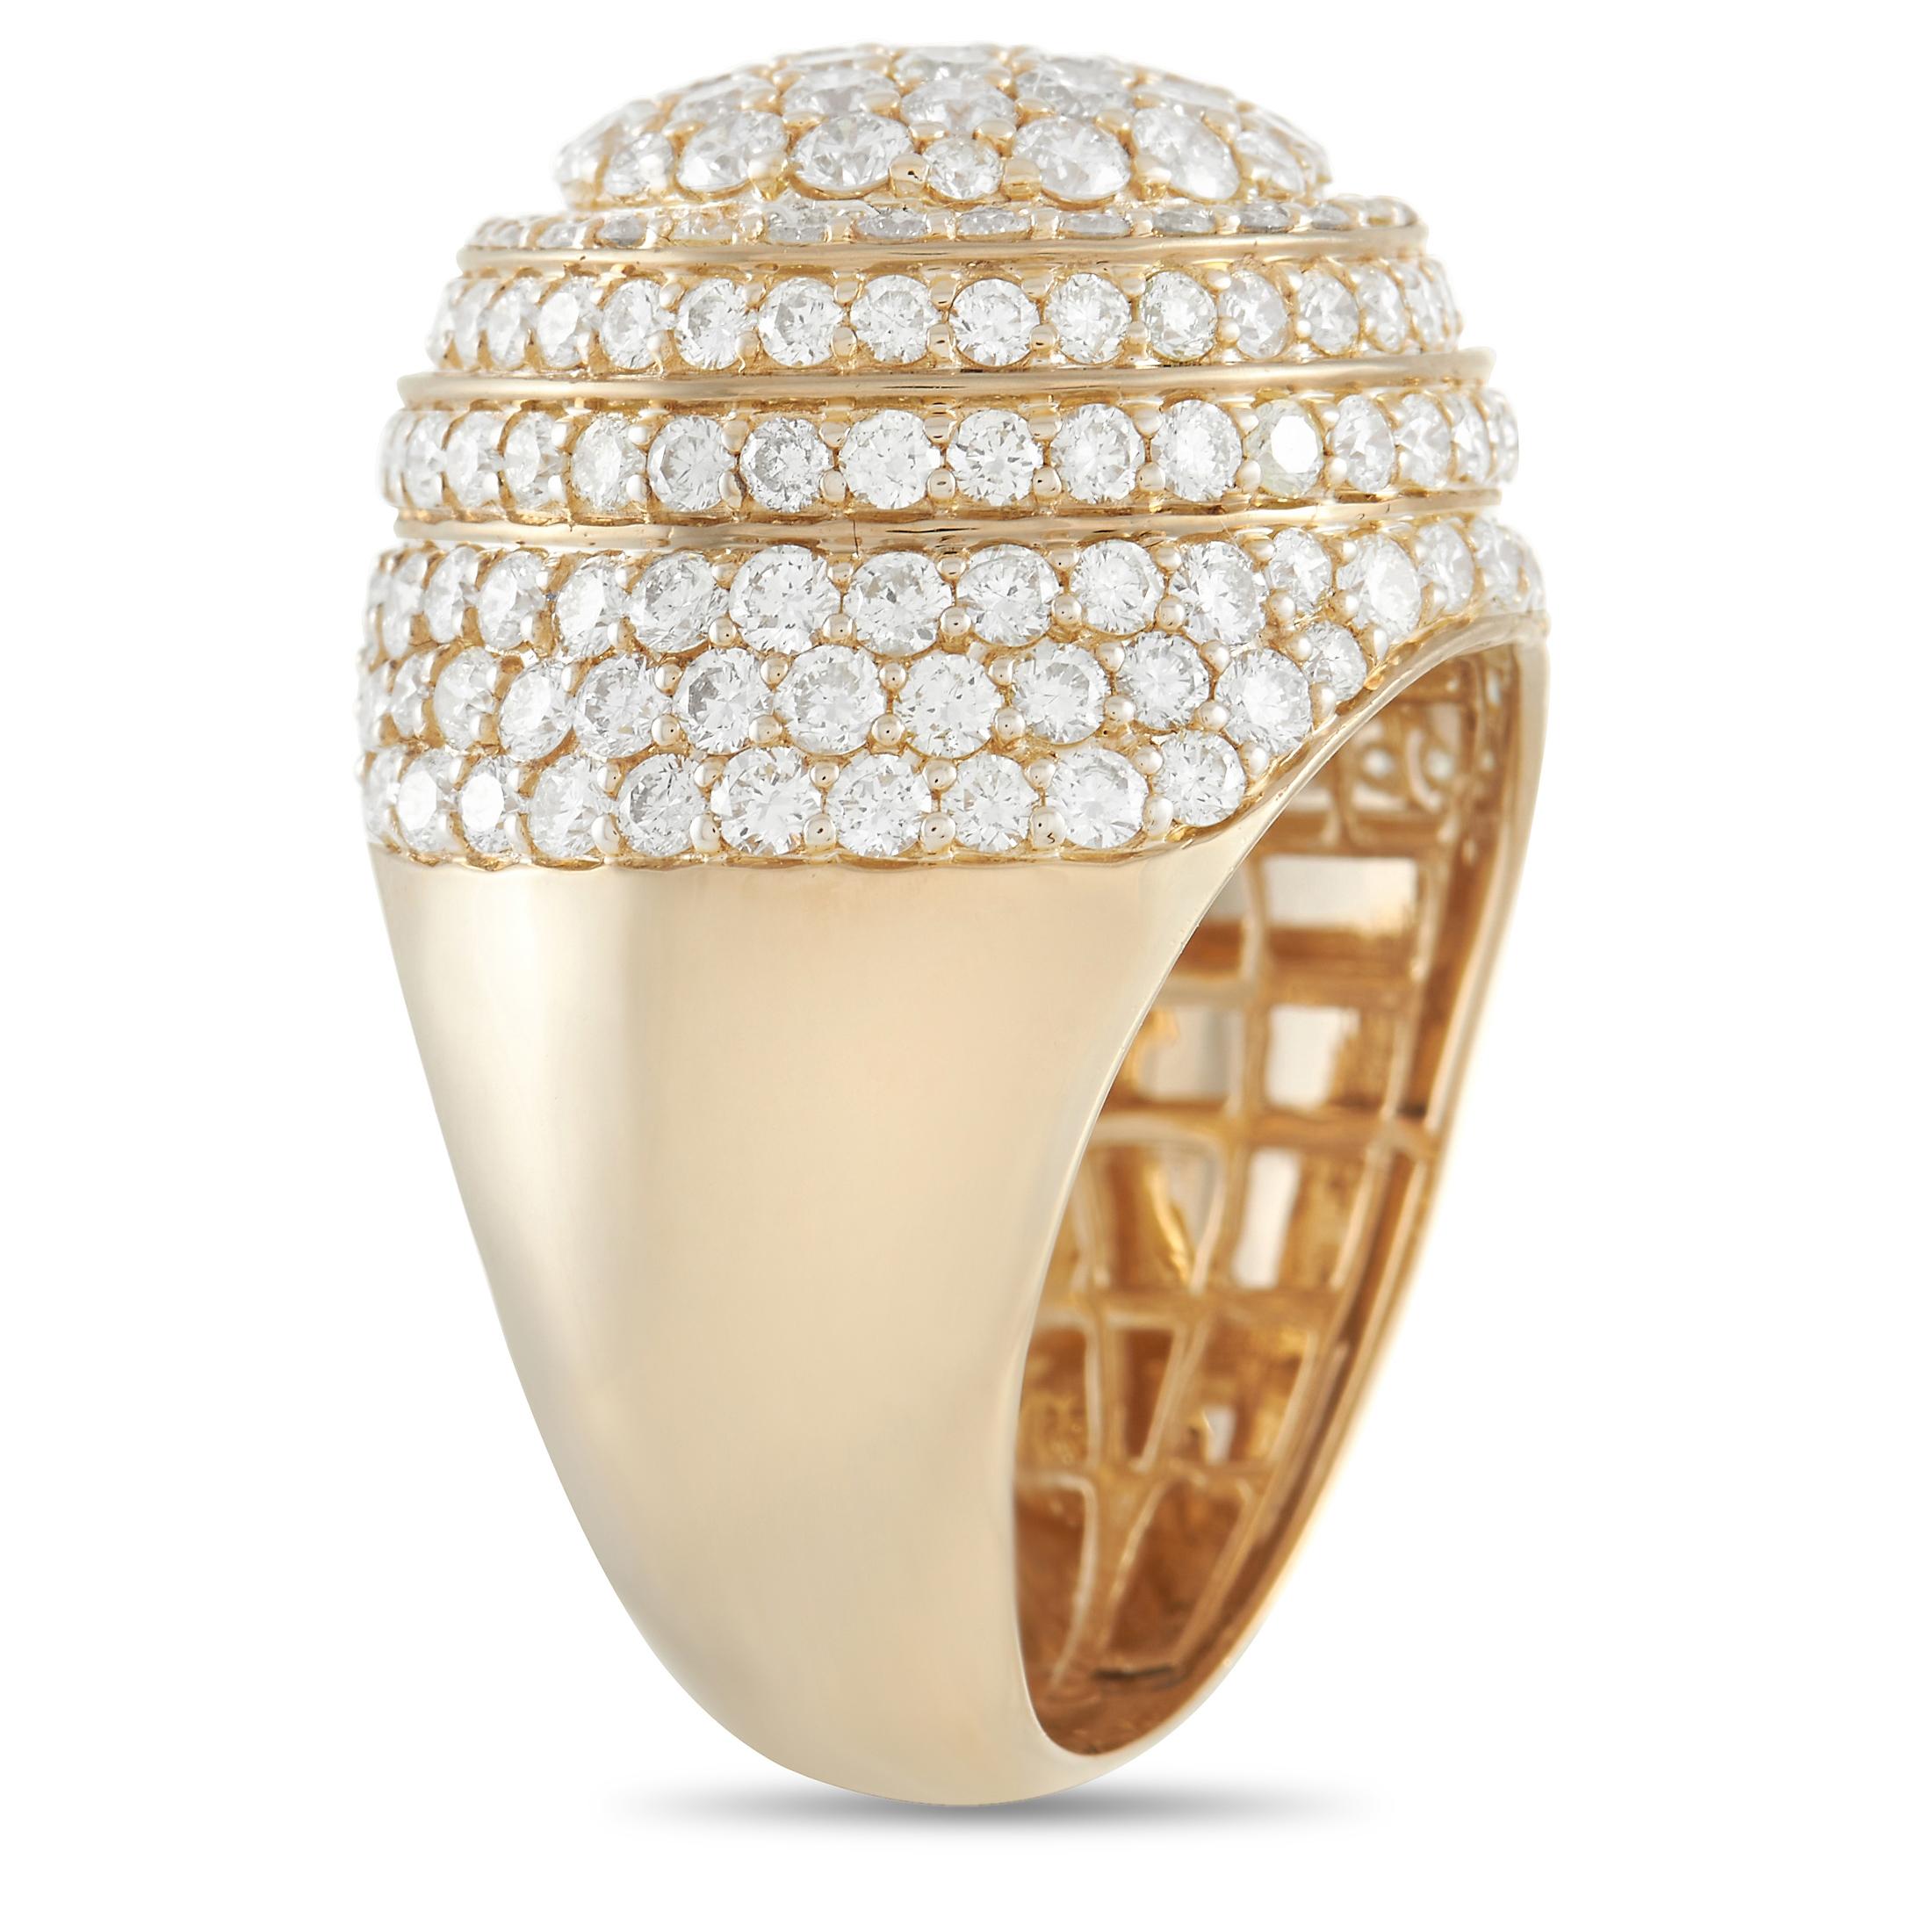 Add luxury to any jewelry collection with this impeccably designed men’s ring. Rows of diamonds totaling 6.40 carats set a circular arrangement make this exceptional ring come alive when it catches the light. Crafted from 14K Yellow Gold, this bold